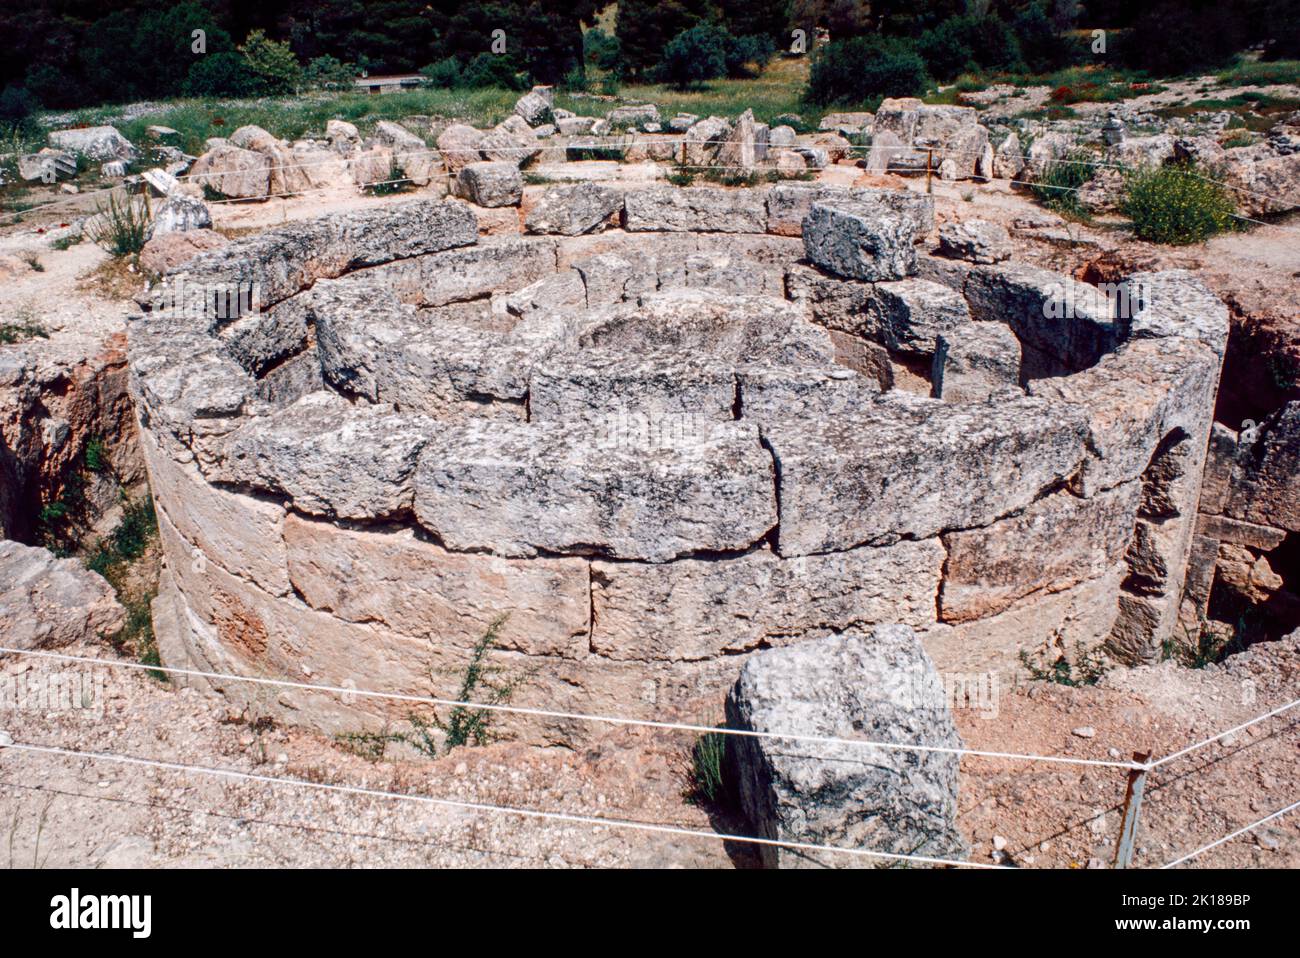 The Tholos at Epidaurus - a small city (polis) in ancient Greece, on the Argolid Peninsula at the Saronic Gulf, best known for its ancient Greek sanctuary. March 1980. Archival scan from a slide. Stock Photo